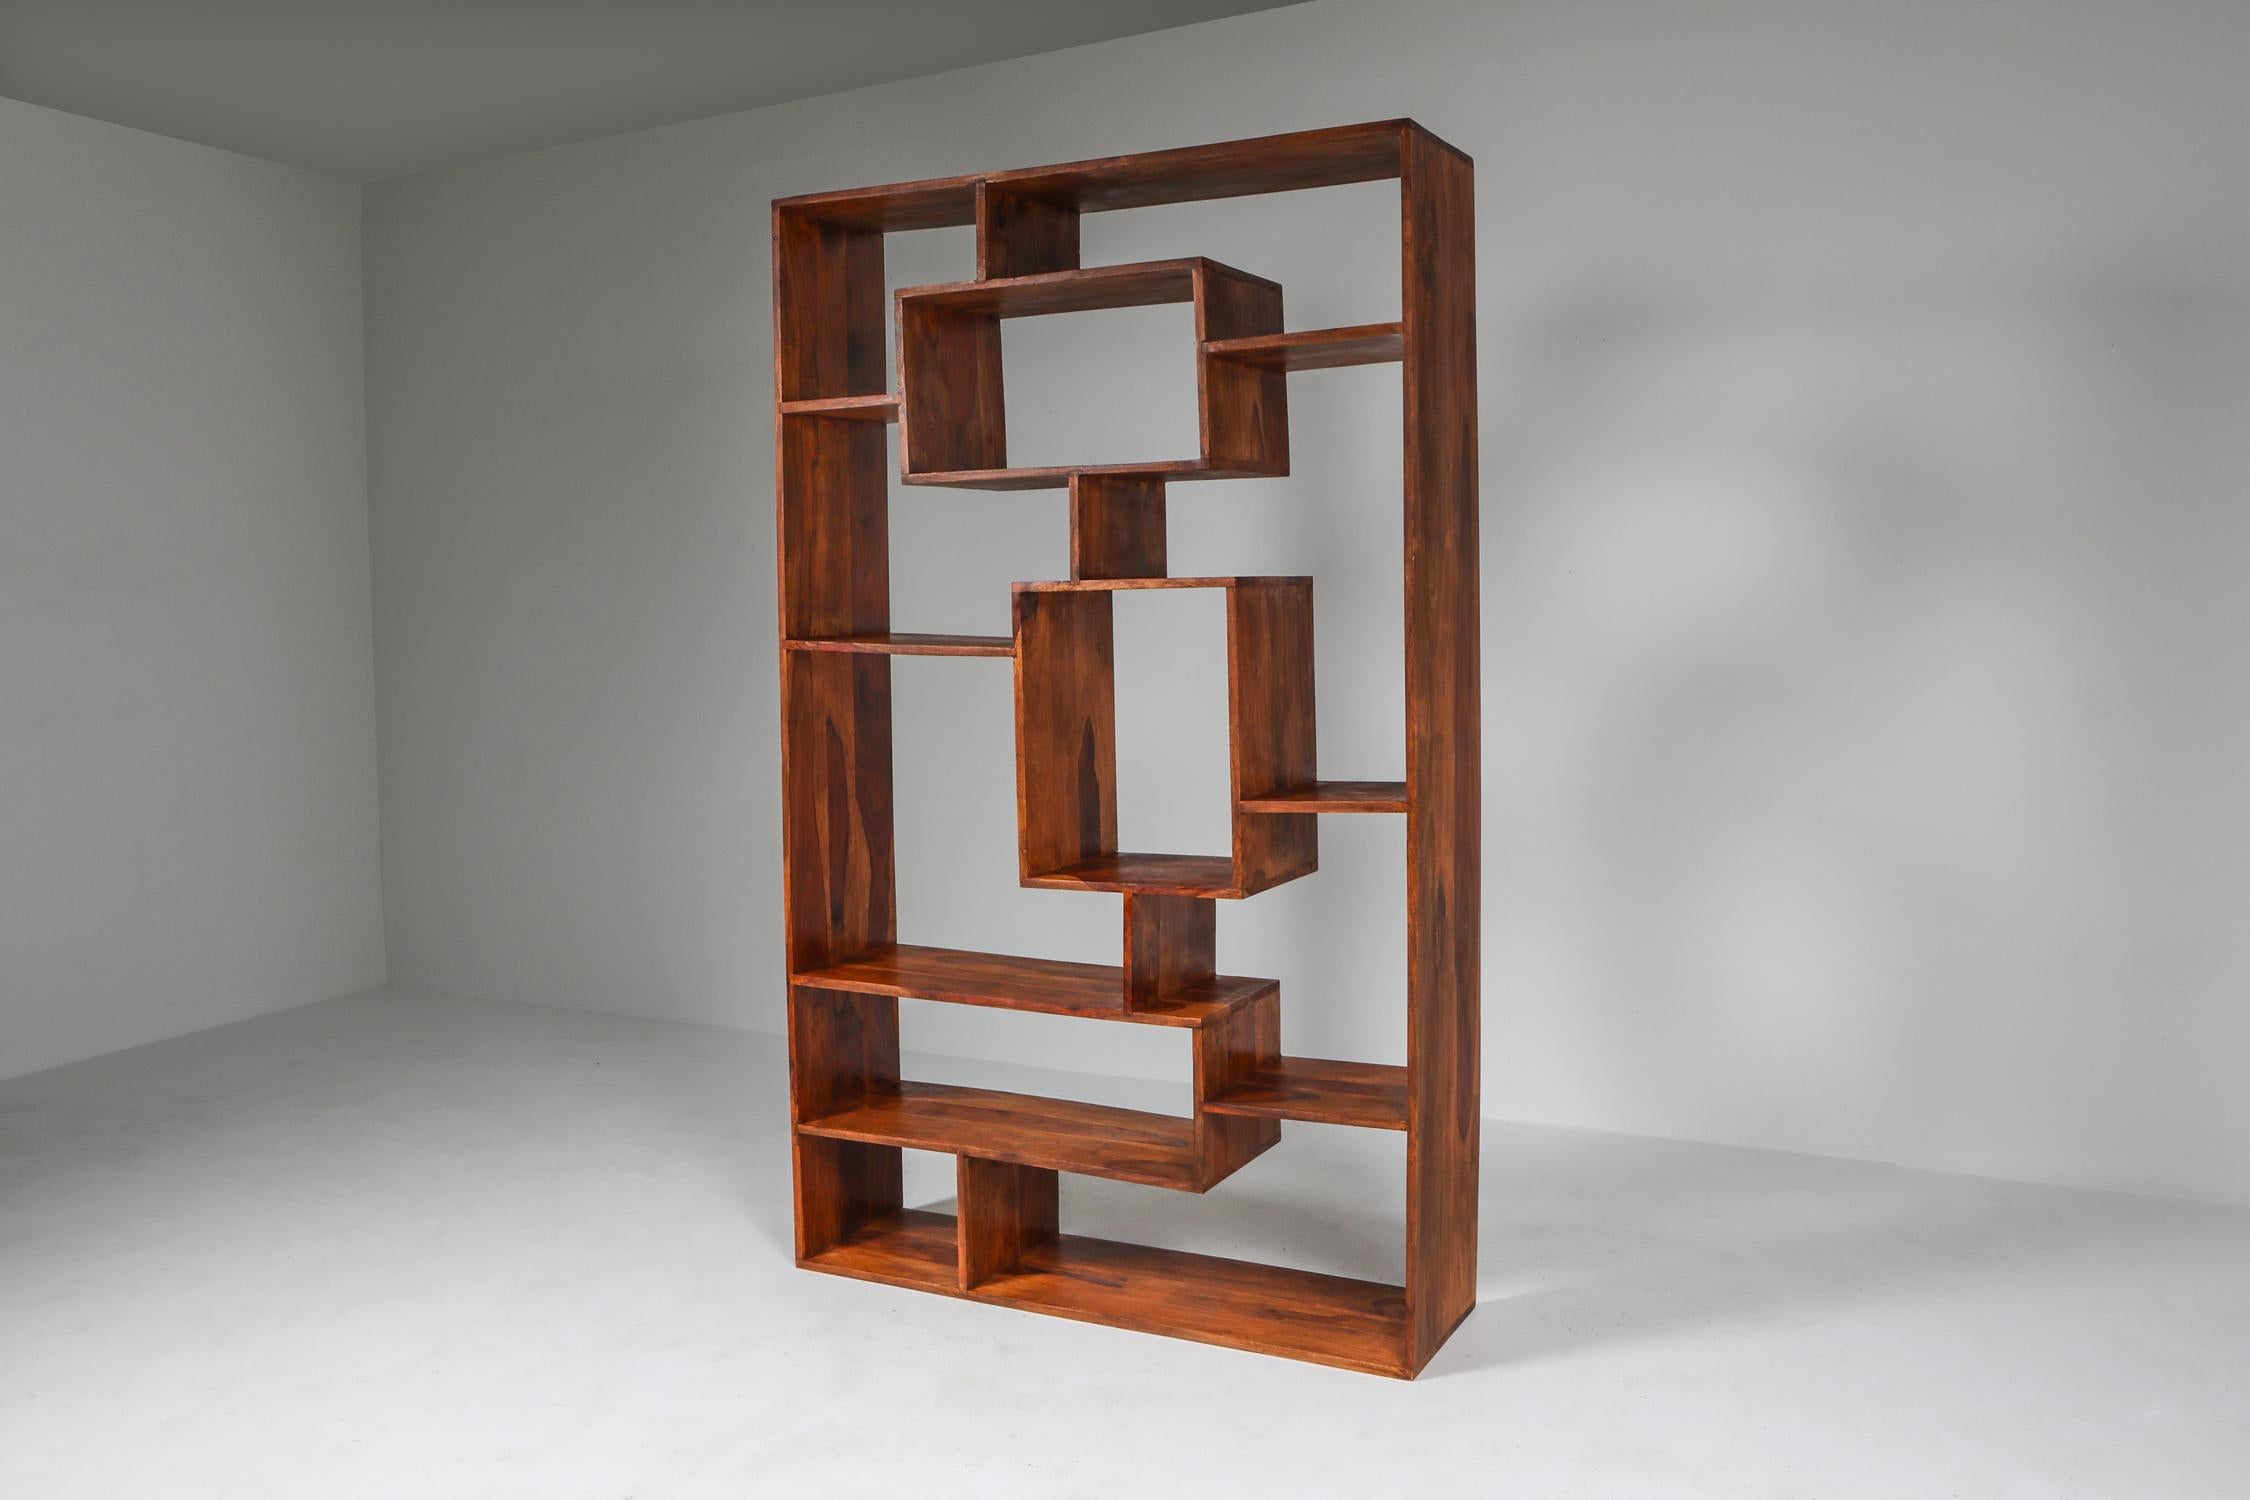 Walnut shelves or book case made by an Italian Postmodern designer.
Breaking through the Minimalist modernism and emphasizing the amazing vein structures of the walnut, which almost resembles olive wood, this piece is the ideal mix of fun,